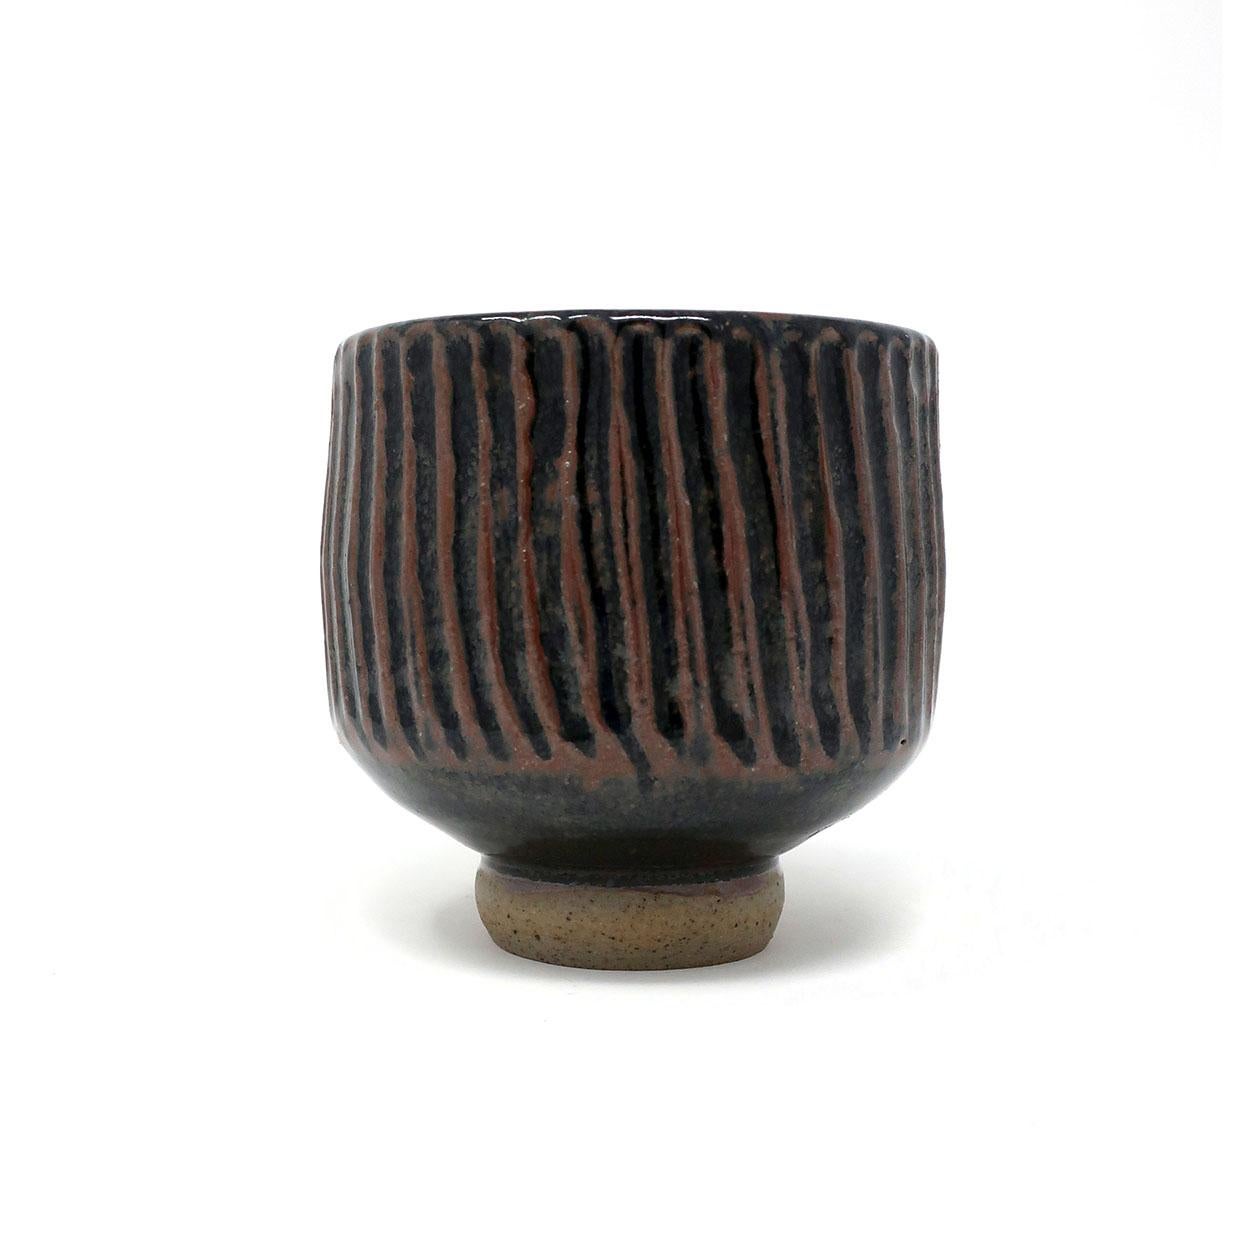 A handmade ceramic vase with irregular stripes complemented by a small base that provides a gravity-defying effect. The glaze is black with warm brown lines. Signed 